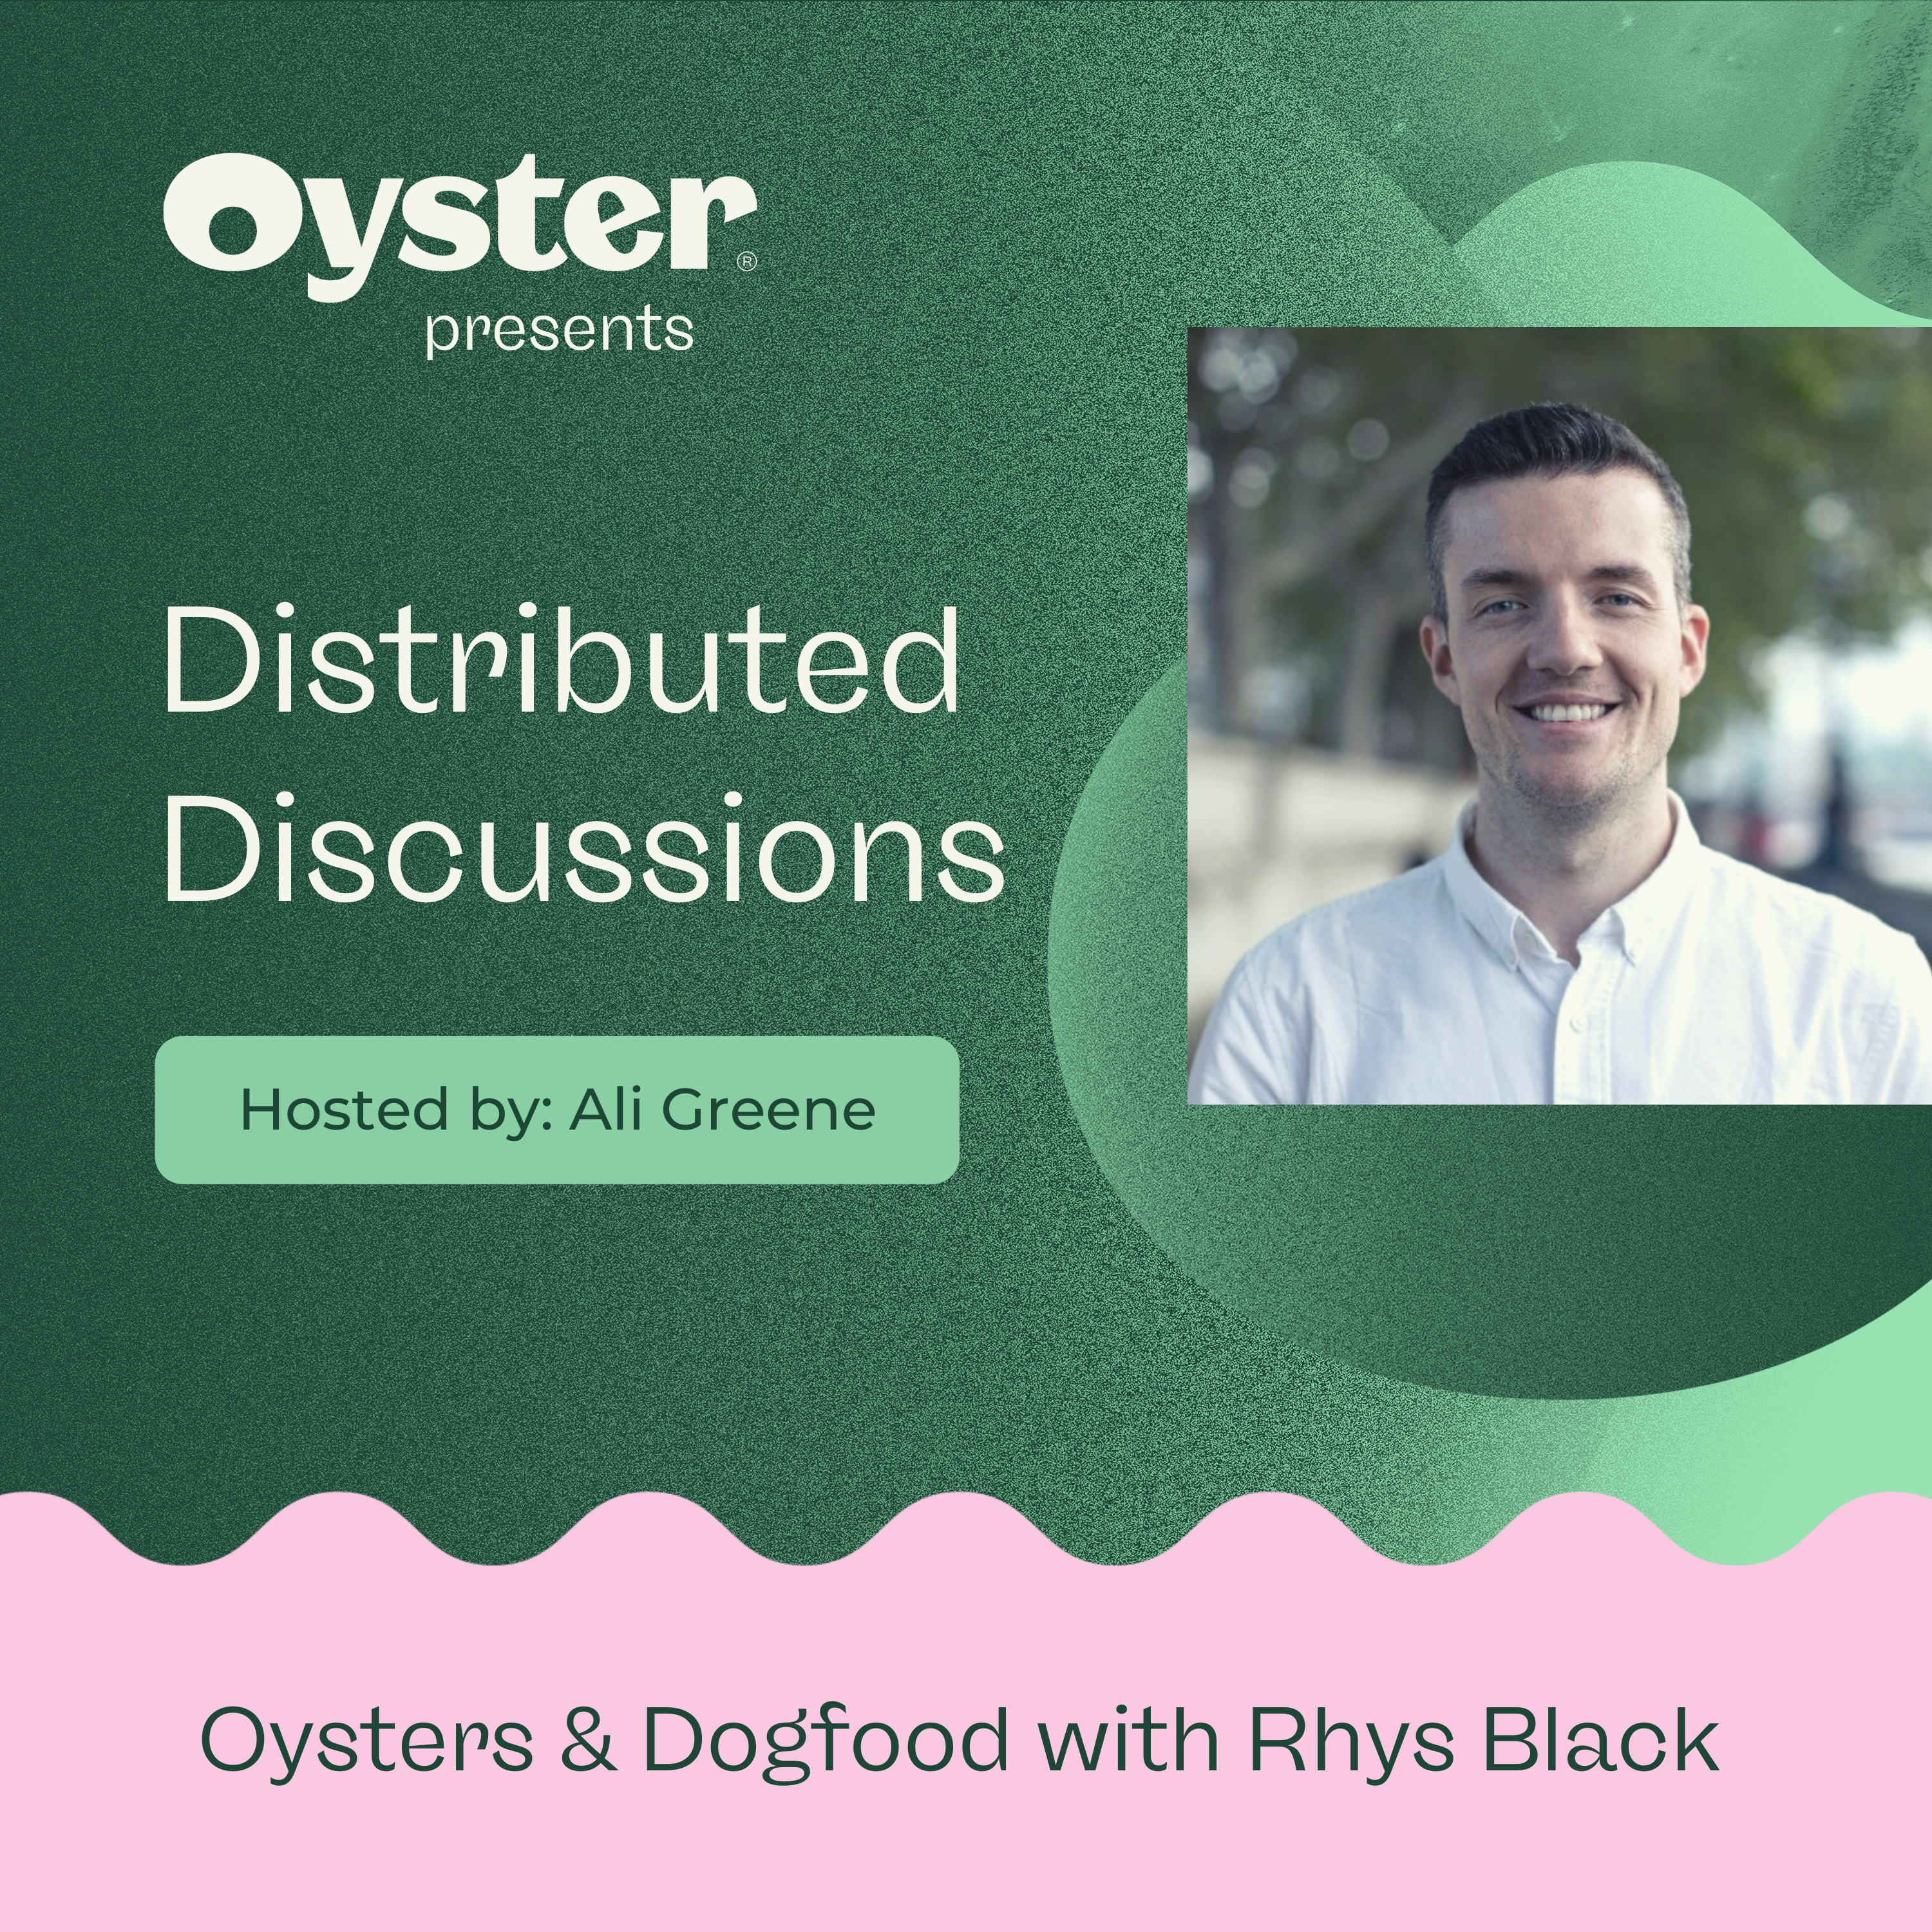 S1E5 - Oysters & Dogfood with Rhys Black 